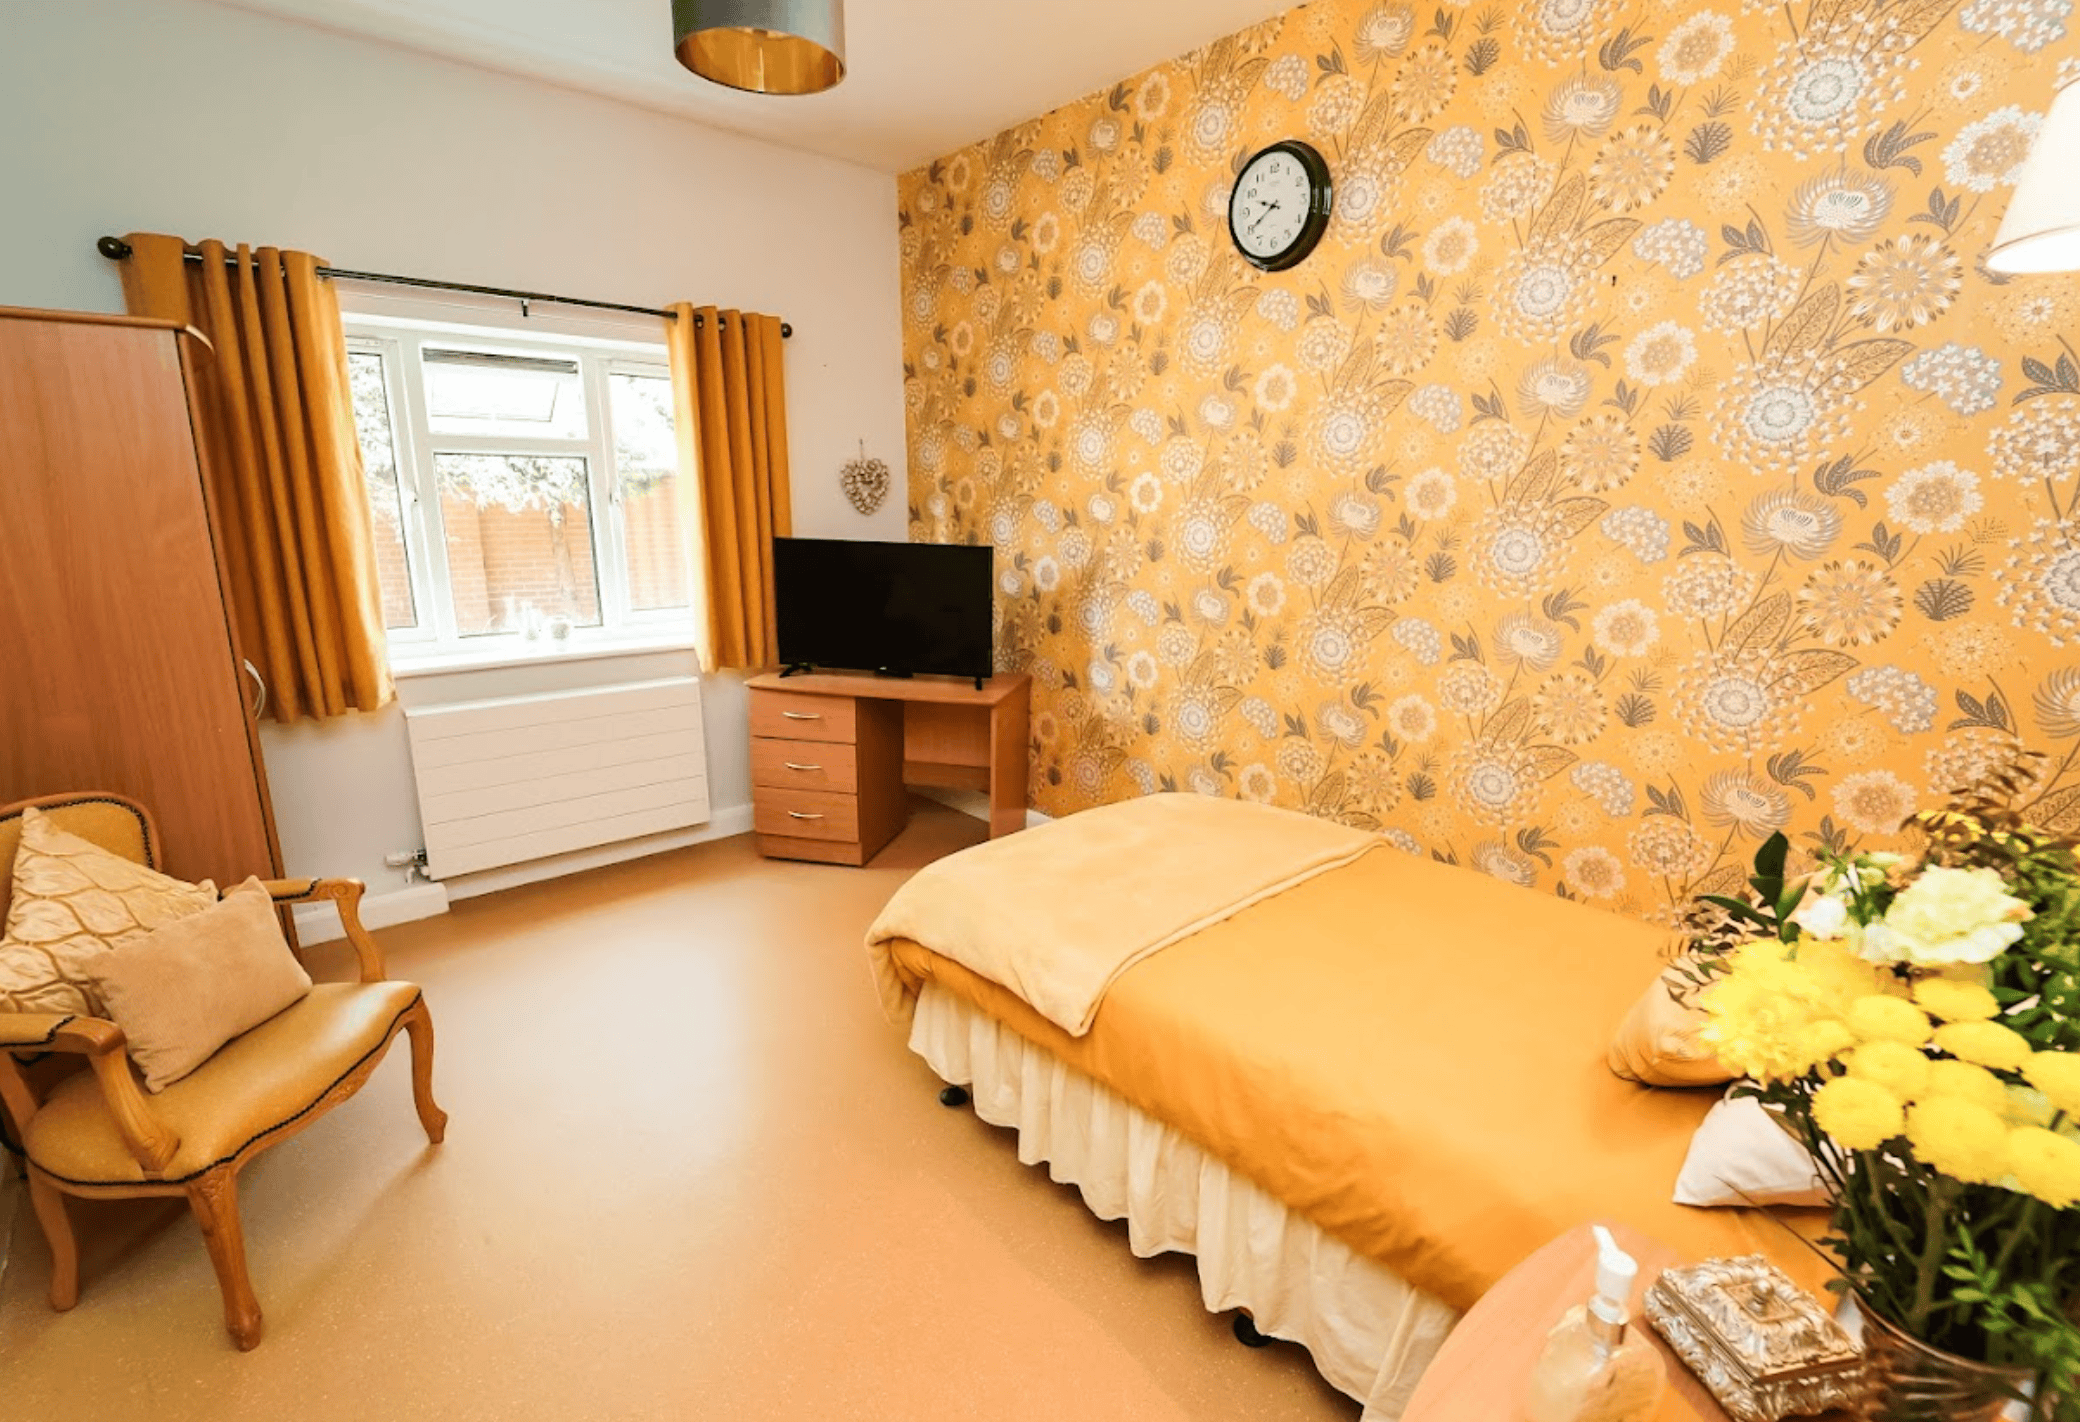 Bedroom at Newgate Lodge Care Home, Mansfield, Nottingham